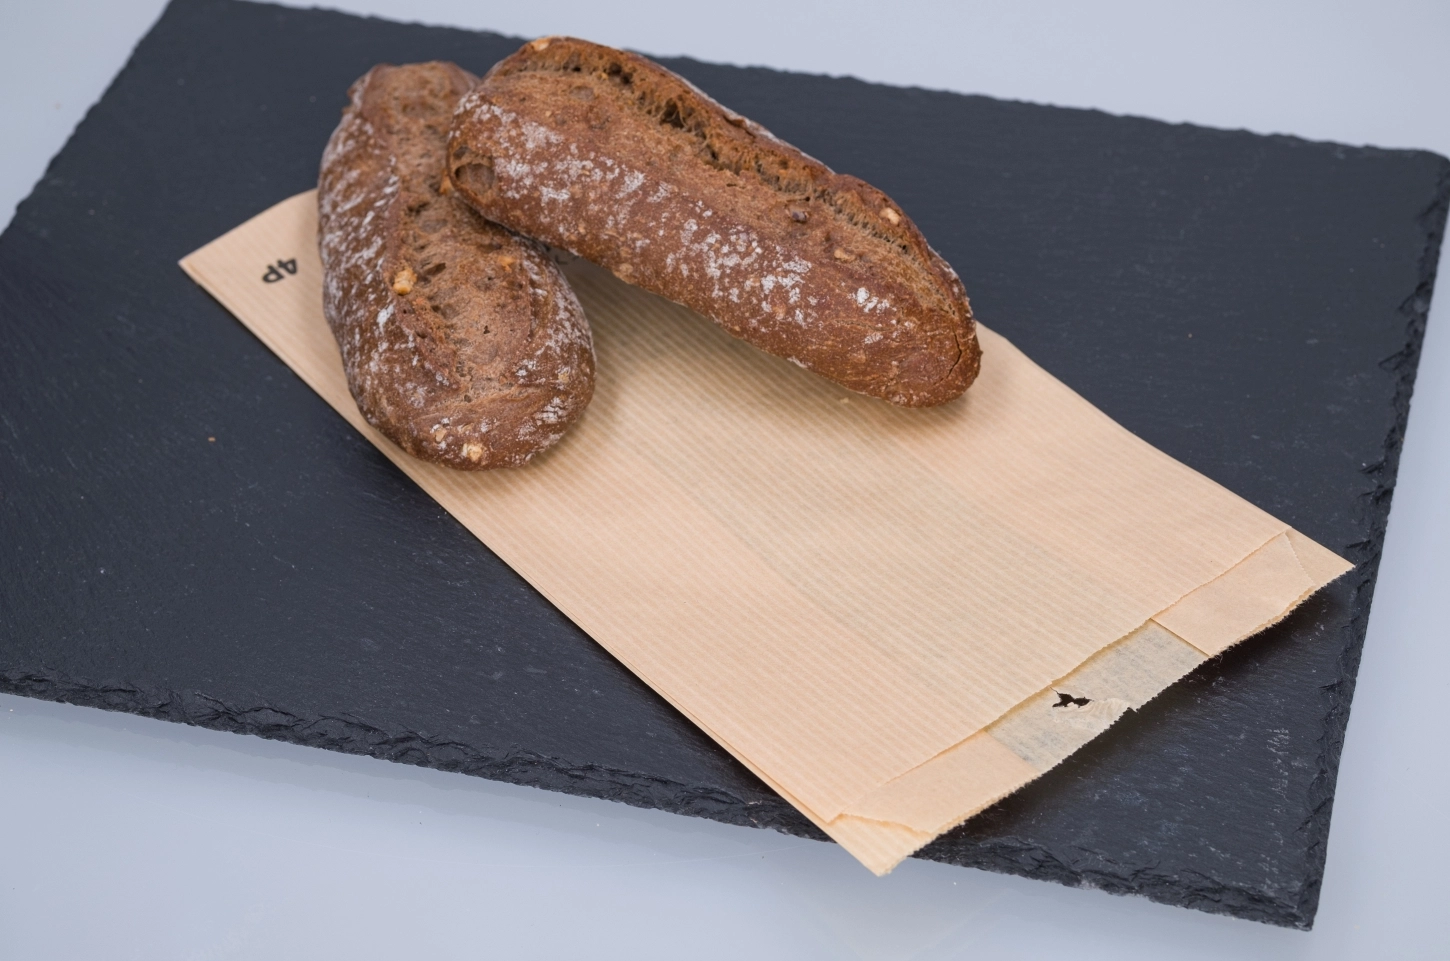 With this Compy bread bag, you opt for a sturdy paper bread bag that is 100% compostable and recyclable.